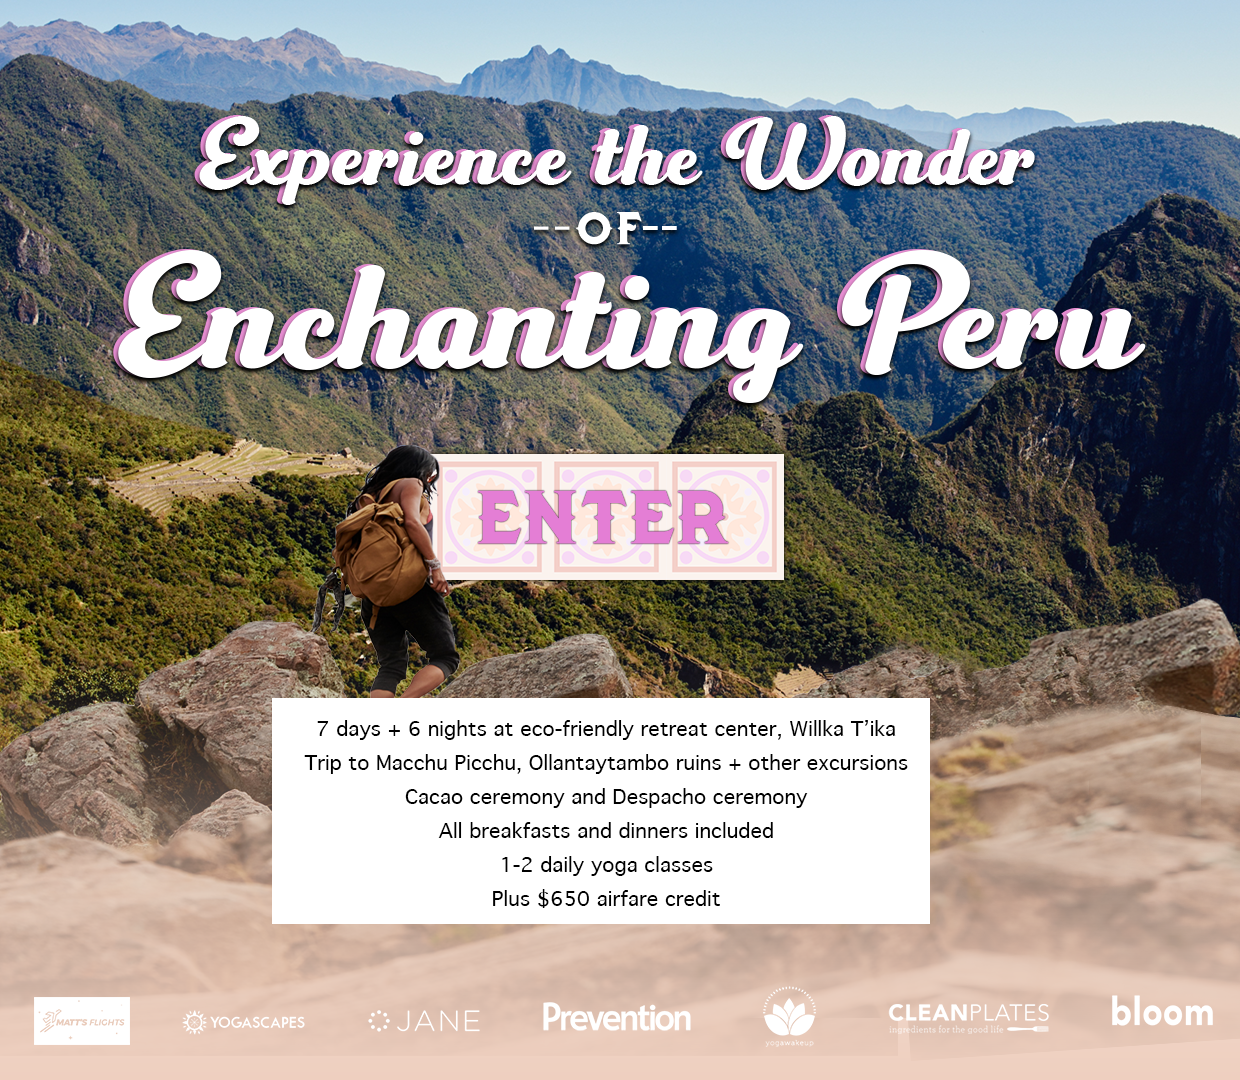 Enter to Win a Relaxing 7-Day Trip to Peru! The trip includes all breakfasts and dinners, $650 cash for airfare, and excursions to Macchu Picchu, the Ollantaytambo Ruins and the Salineros salt mines! Enter Now!